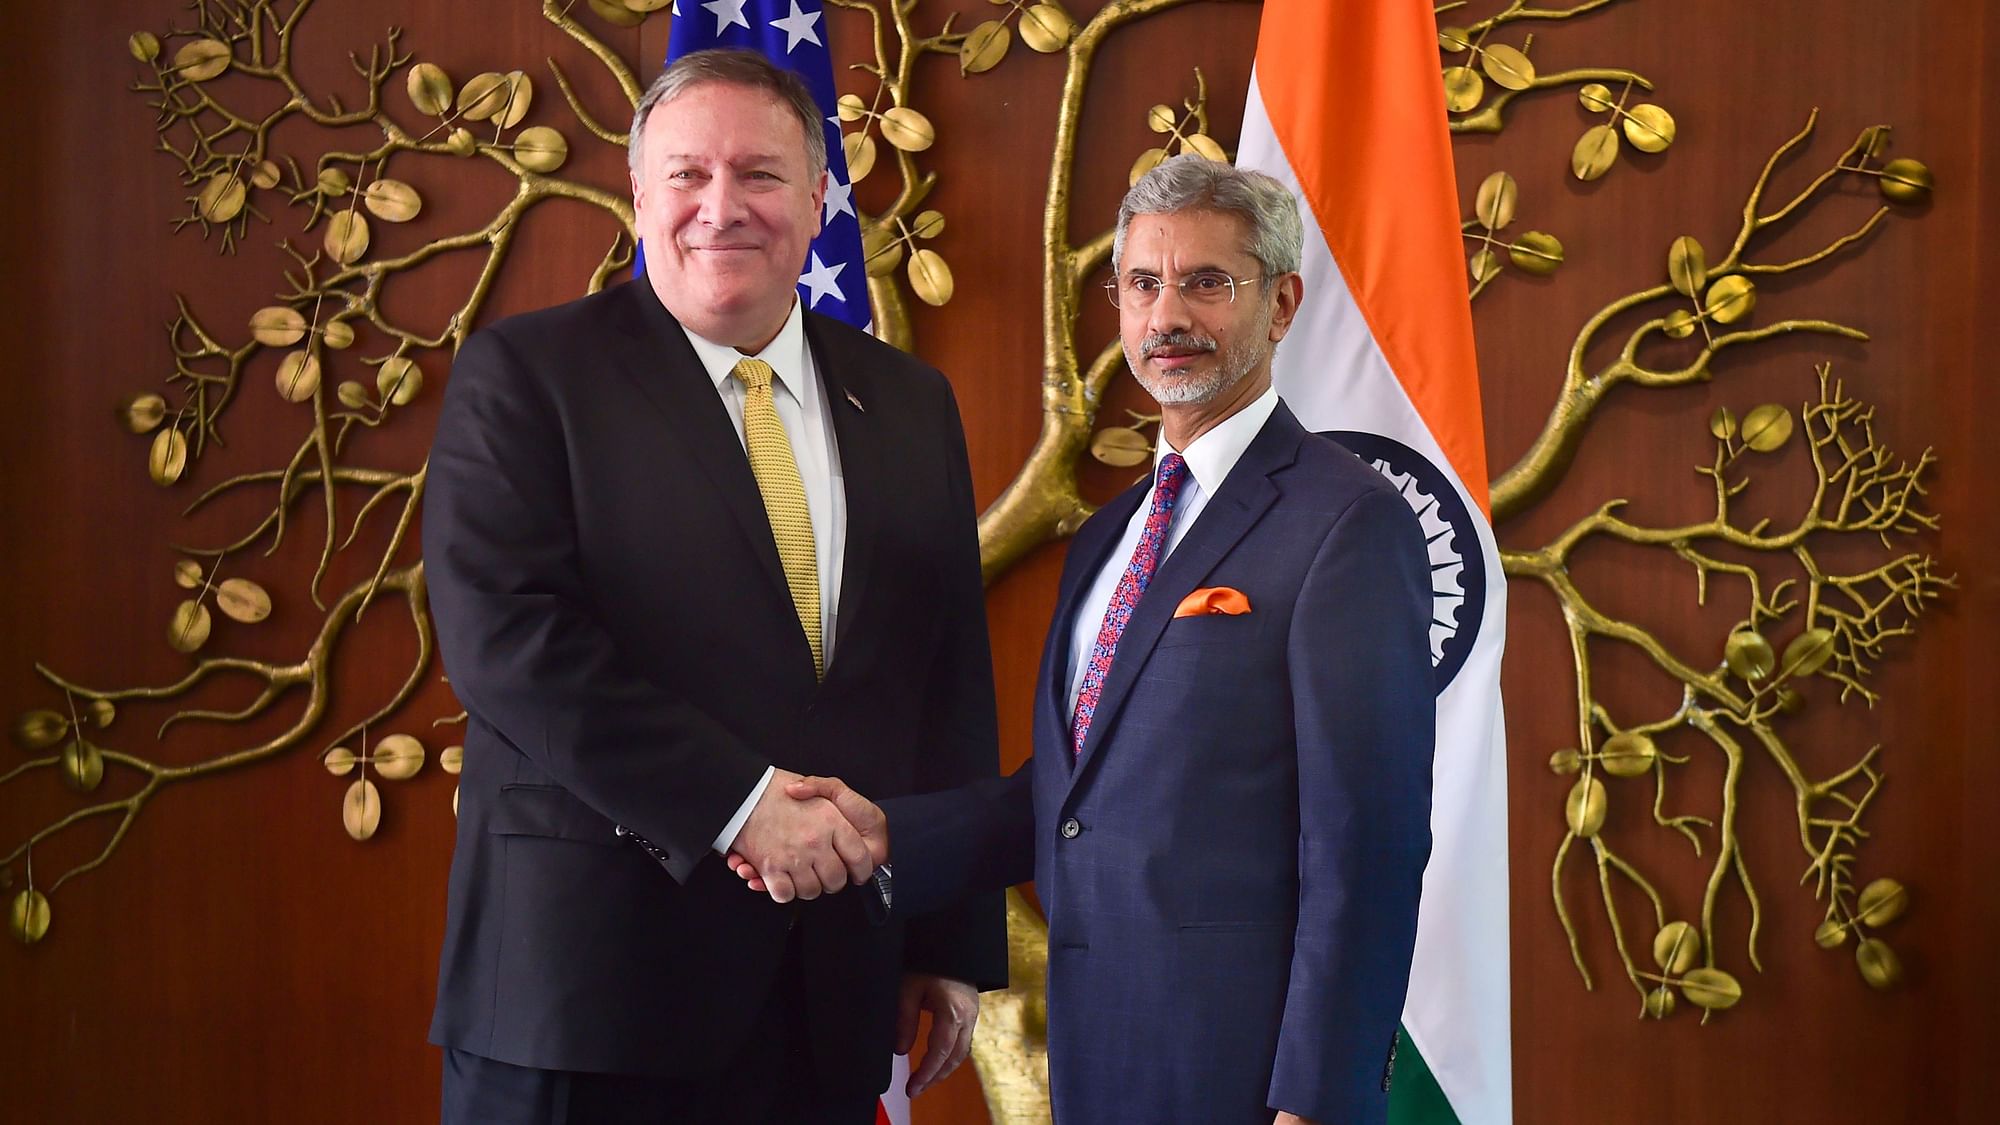  External Affairs Minister S Jaishankar shakes hand with US Secretary of State Mike Pompeo